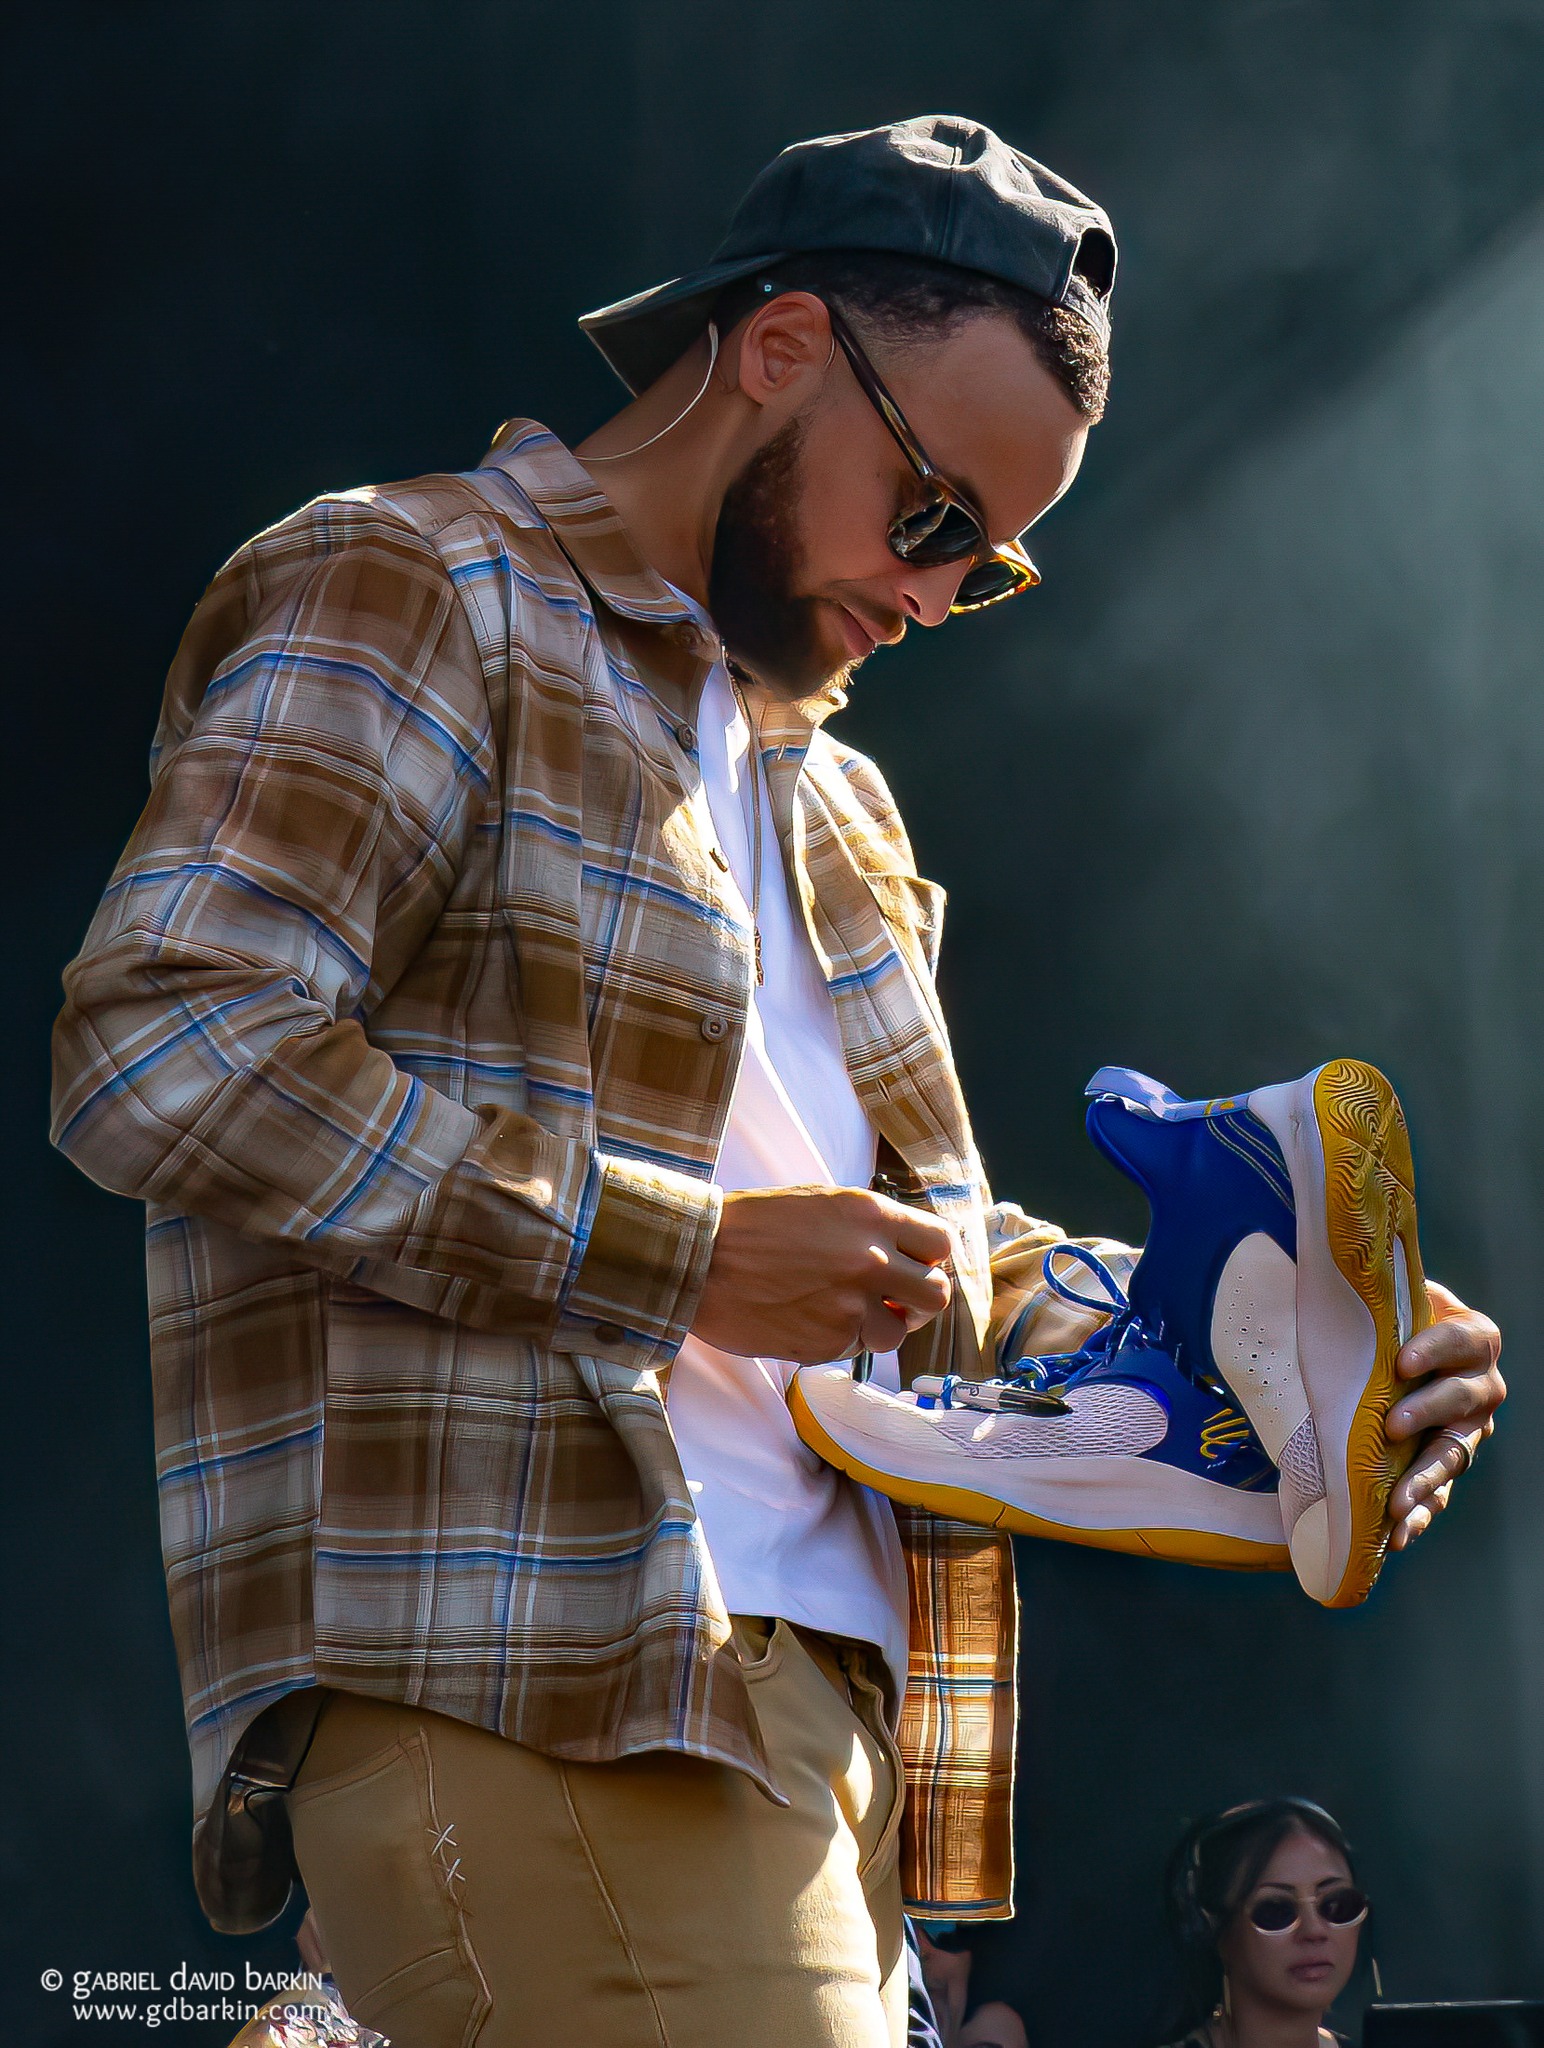 Steph Curry autographing some sneakers